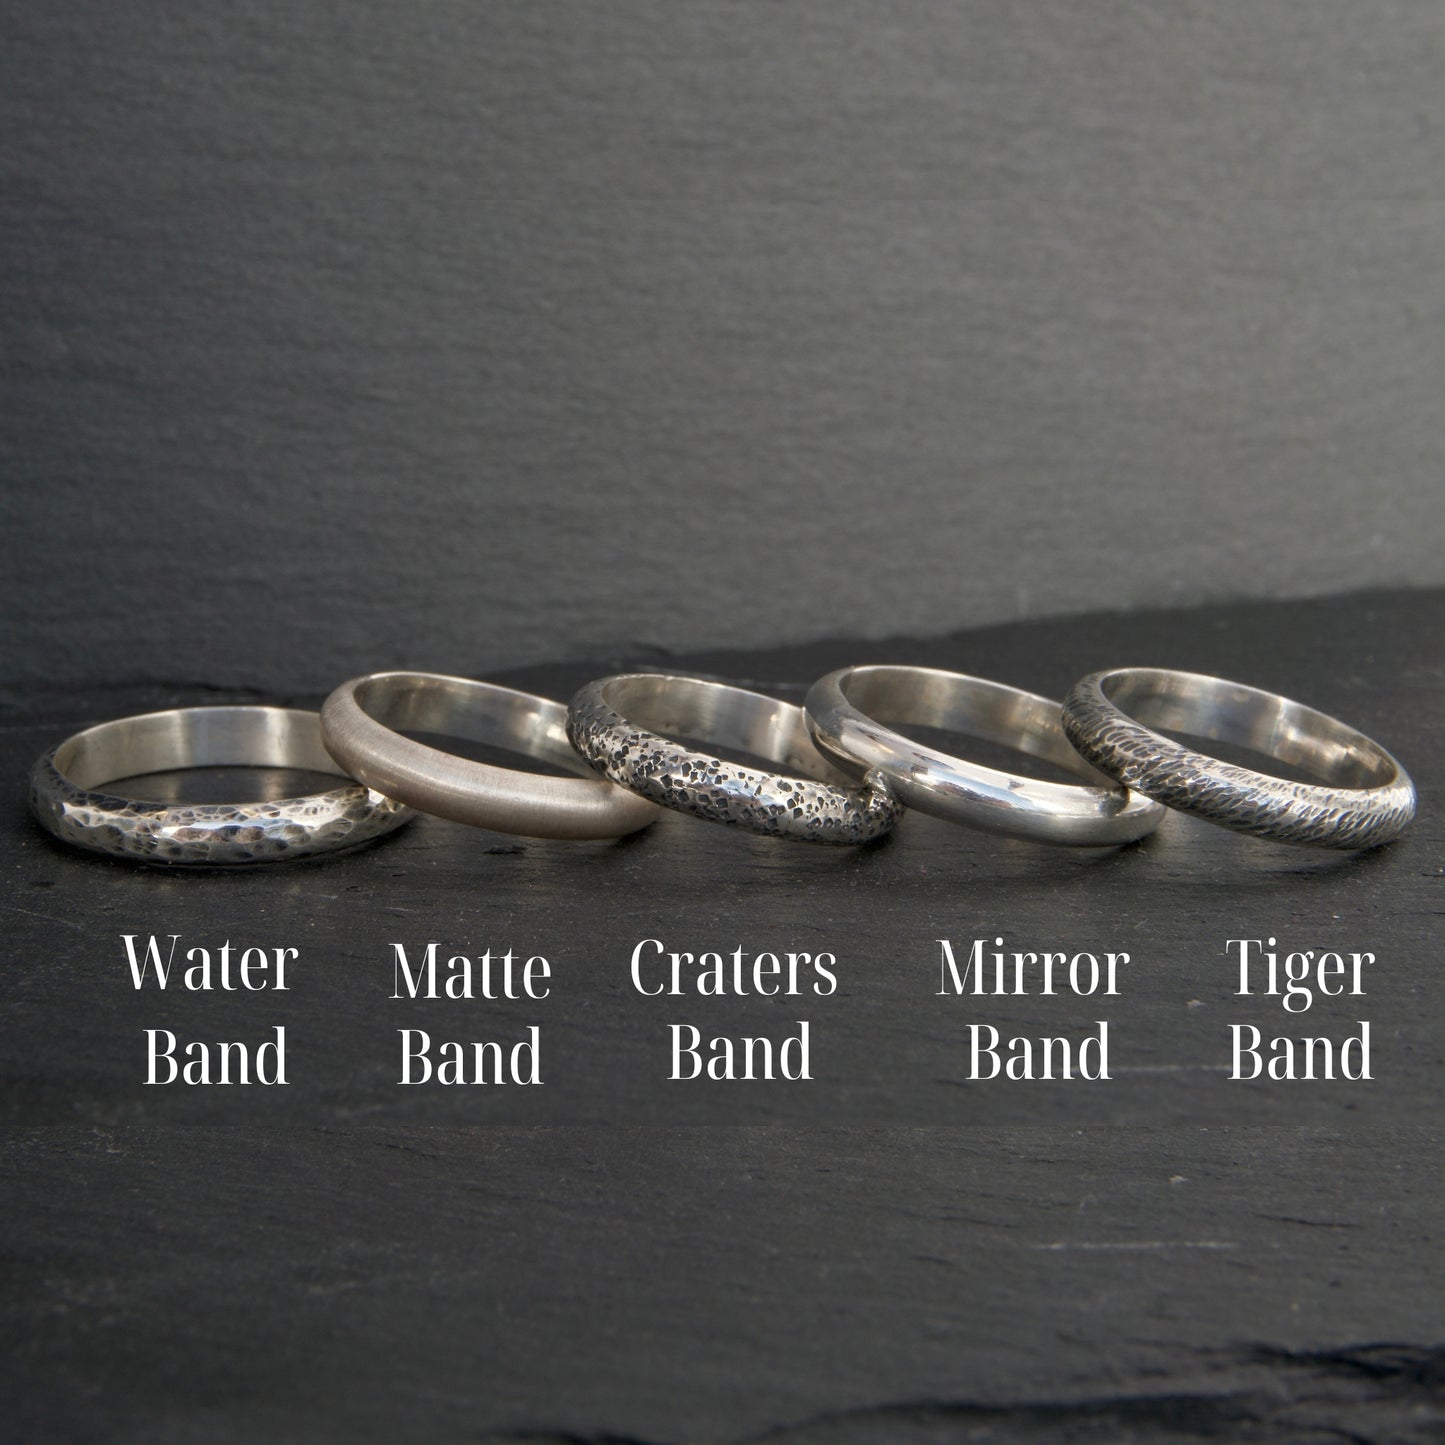 The Water Band